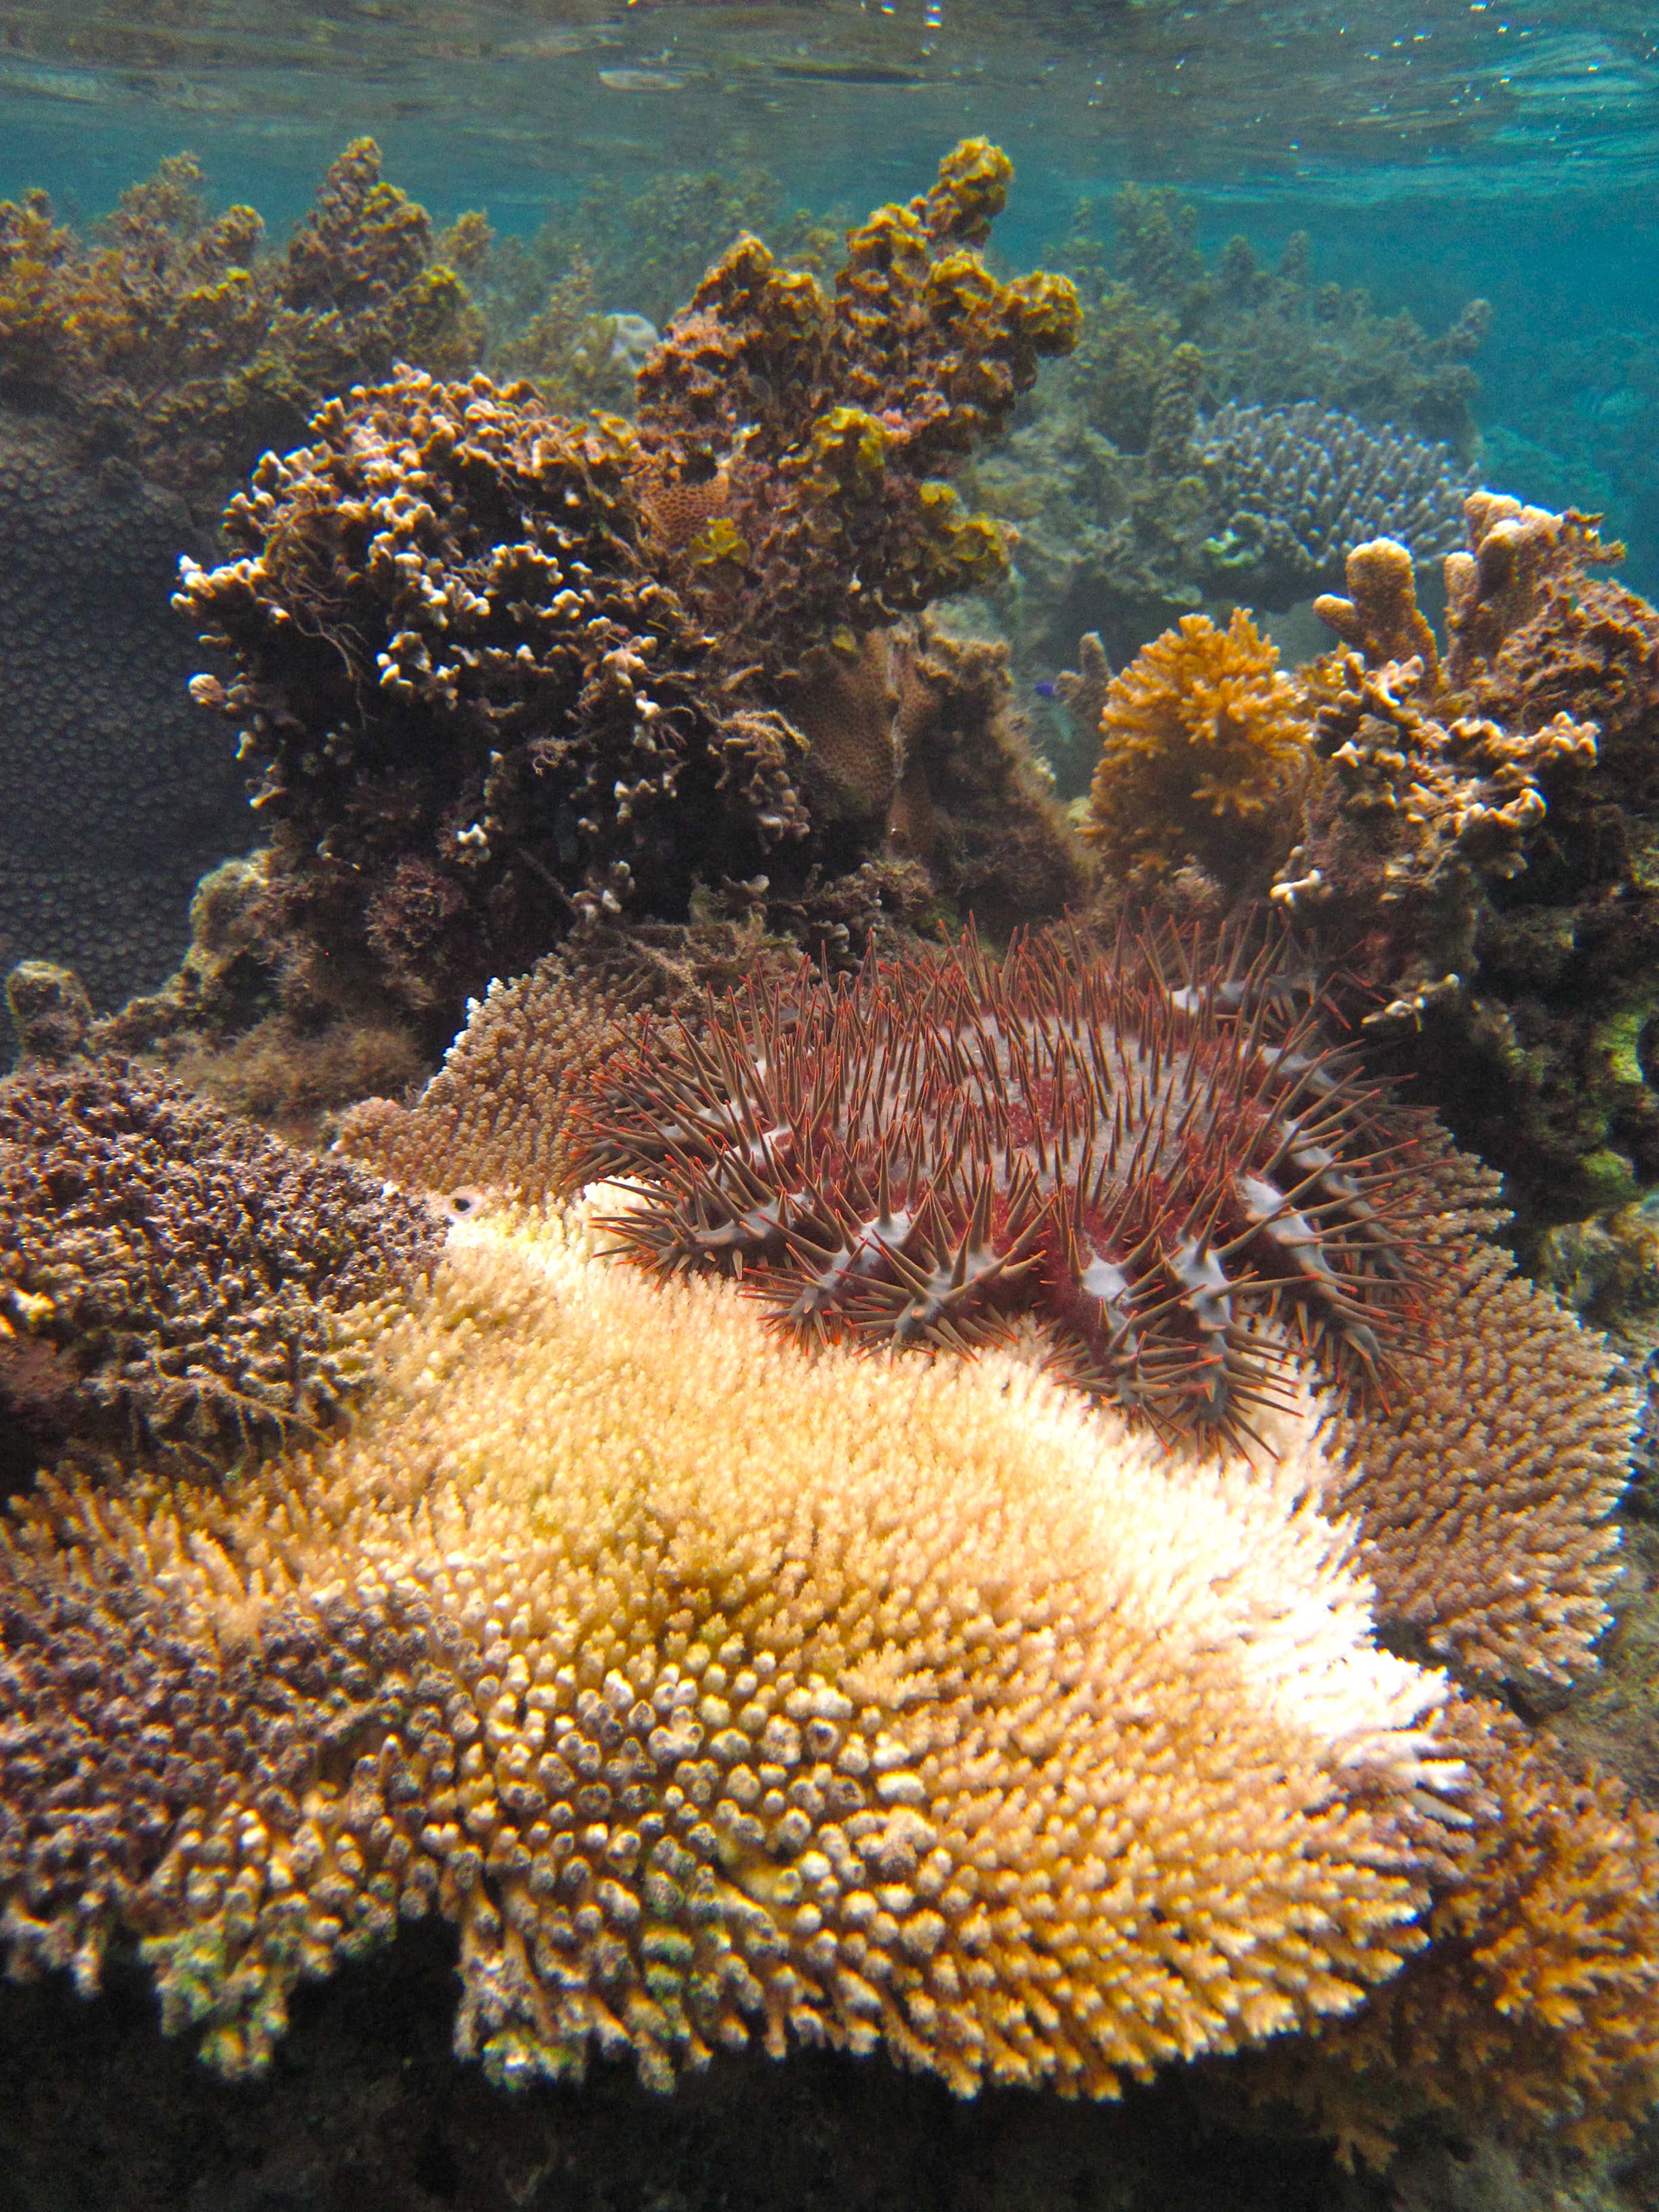 A crown-of-thorns sea star eating a coral from the genus Acropora, which is a preferred meal for the organism. The photos were taken in the non-protected fishing area on Votua Reef, on the Coral Coast of the Fiji Islands. (Credit: Cody Clements, Georgia Tech)